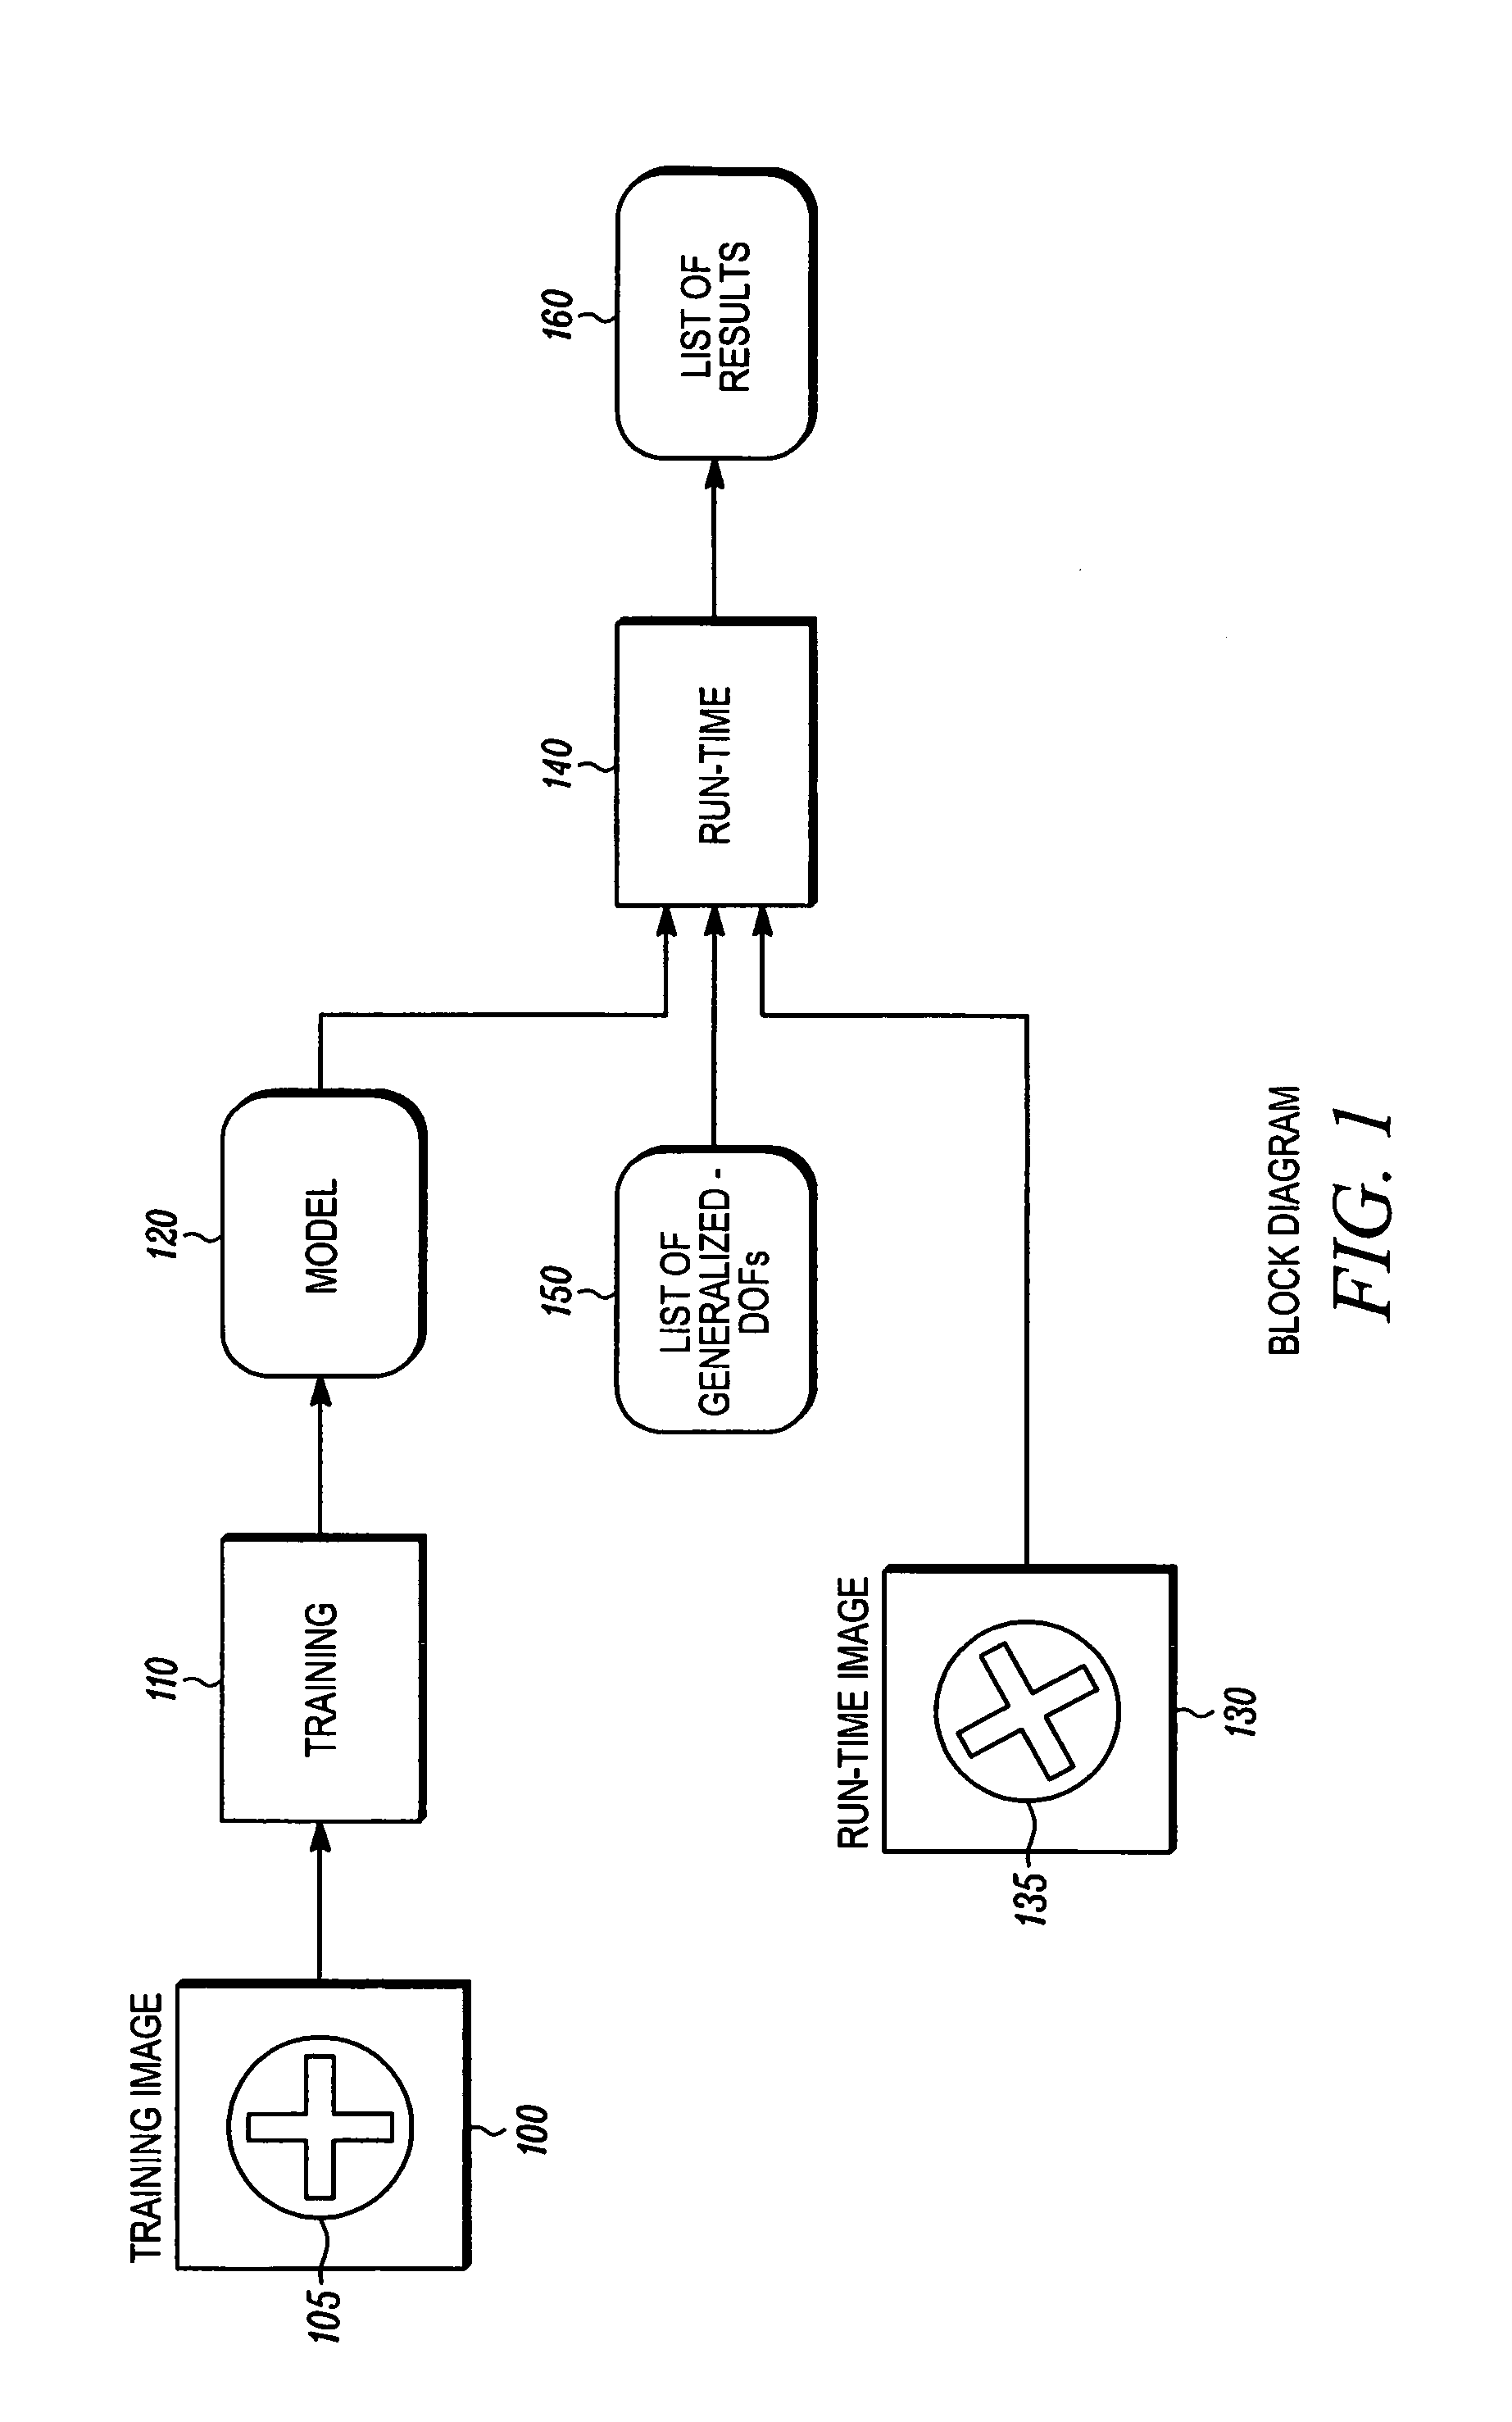 Method for fast, robust, multi-dimensional pattern recognition